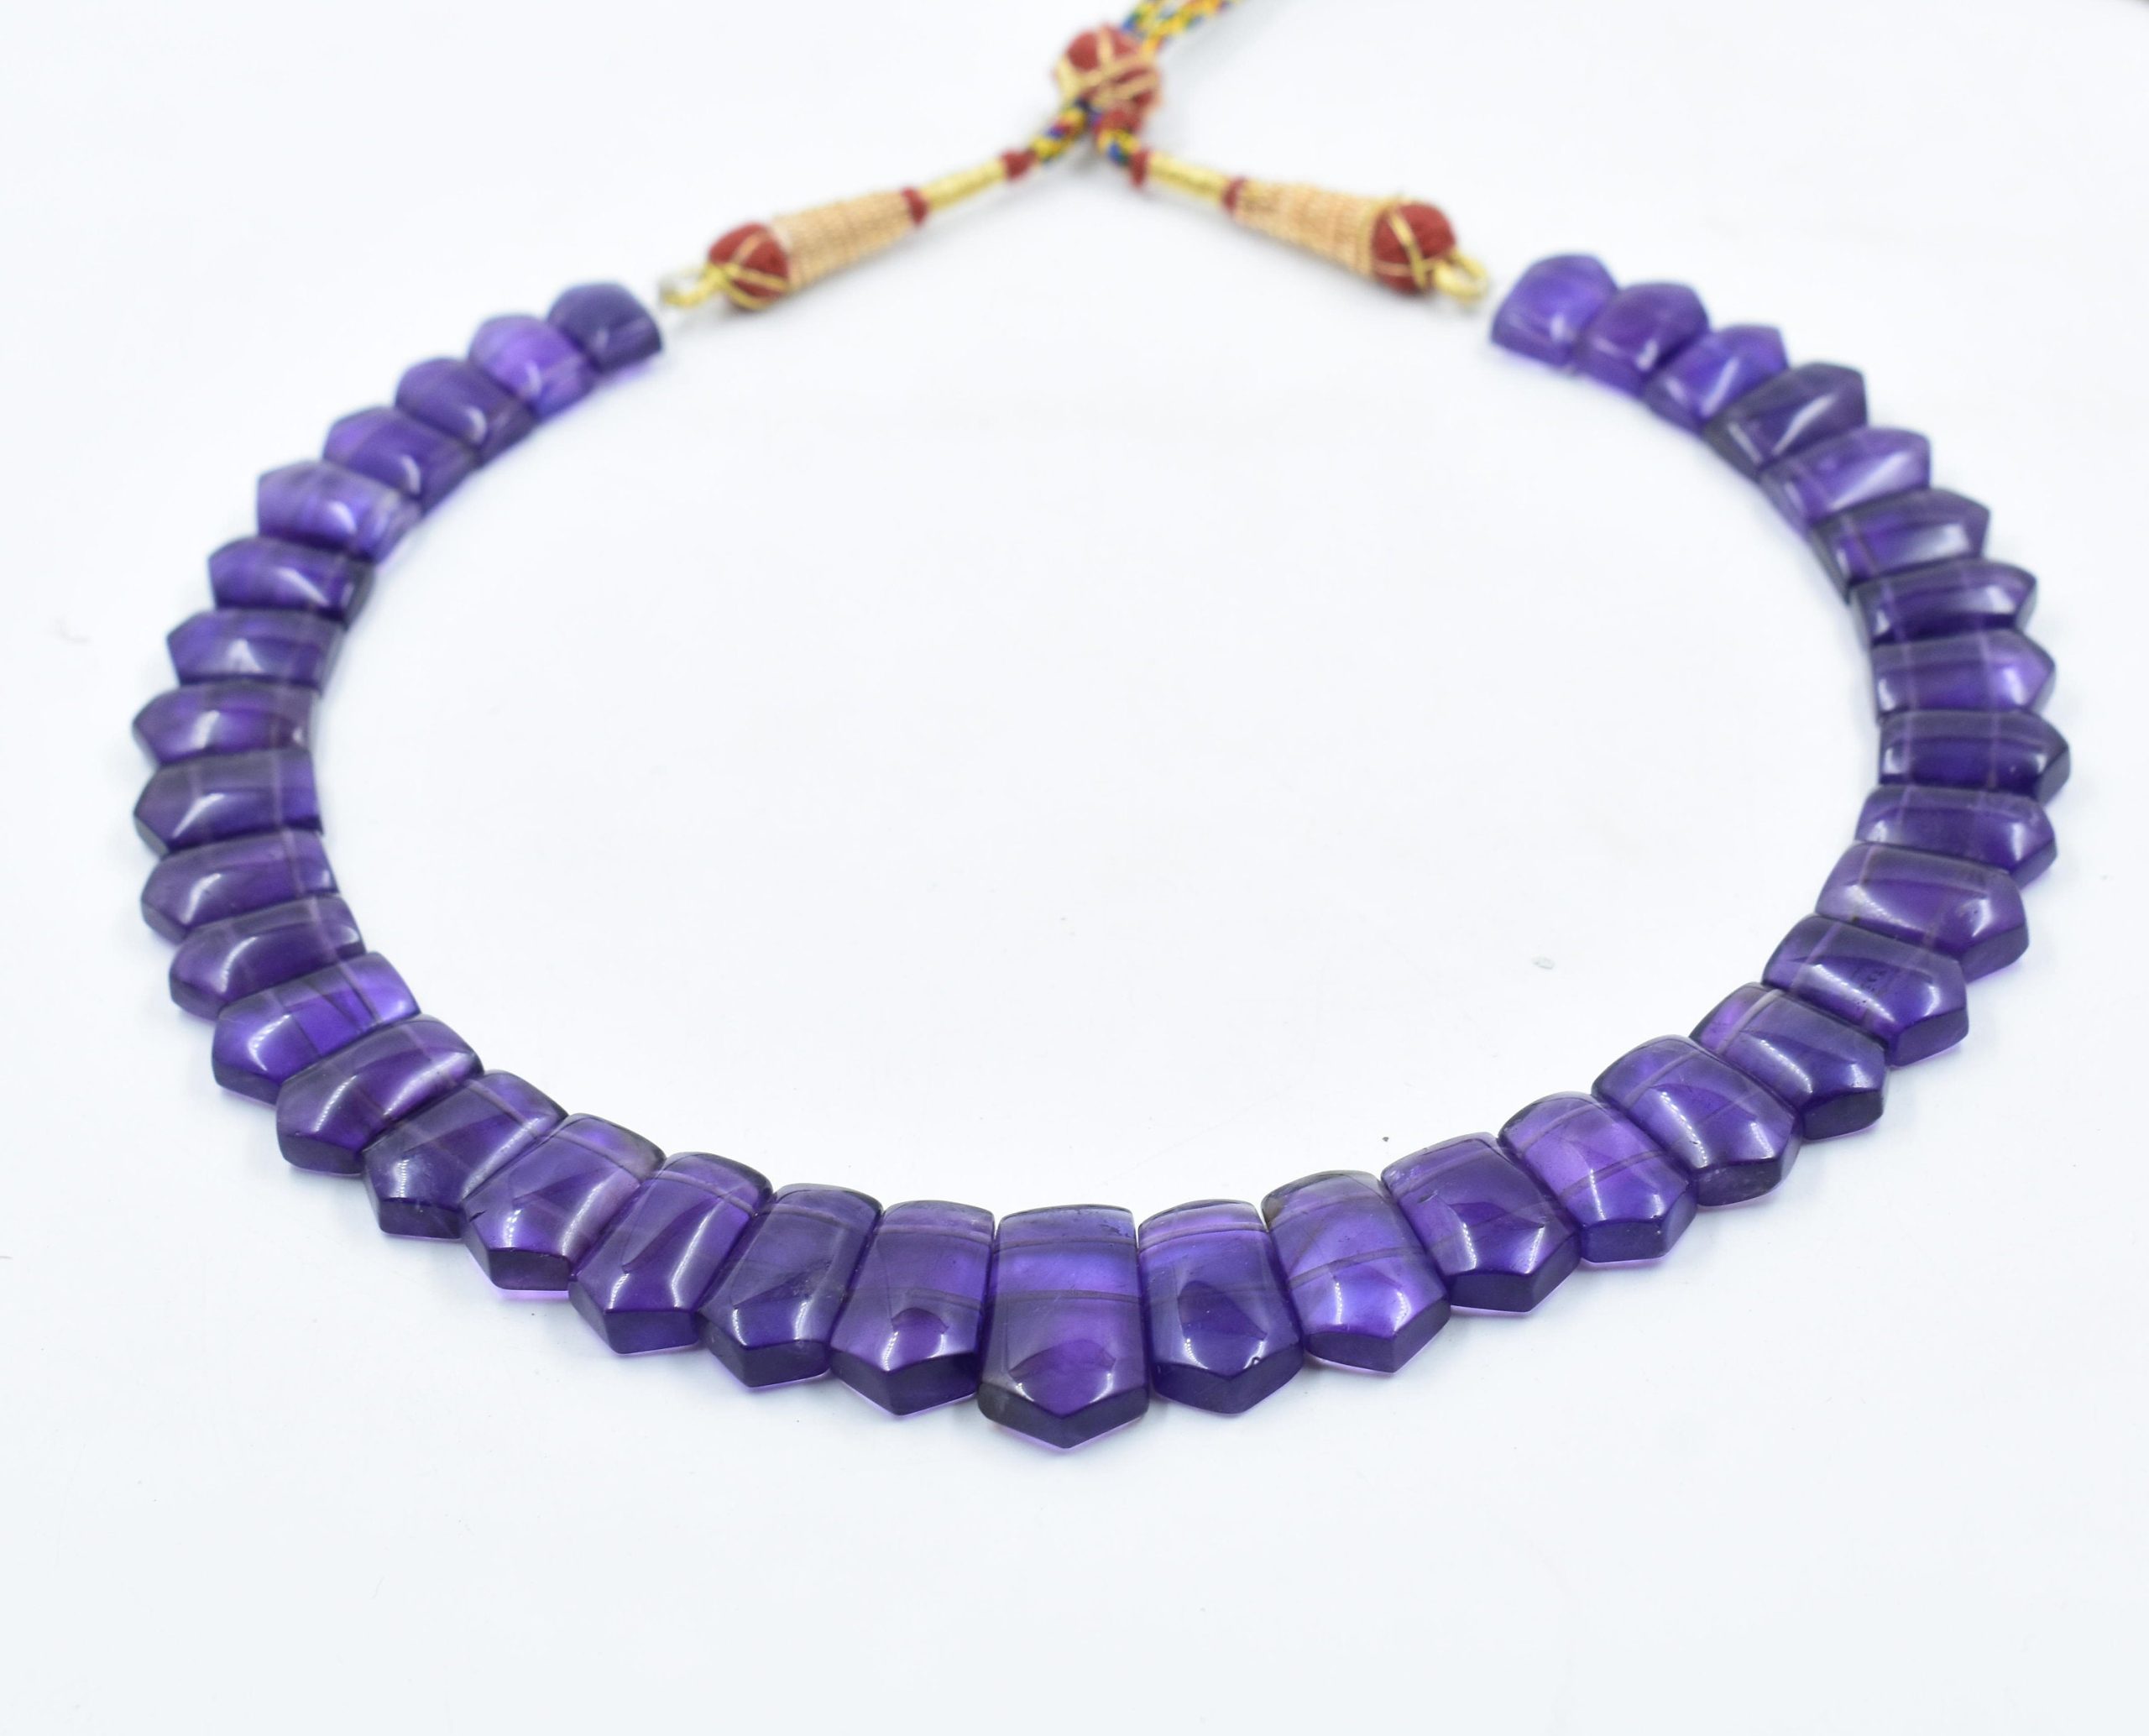 100%Natural Amethyst Handmade Necklace,Collar Necklace,Princess Necklace,rondelles beads,Gemstone Art,,Matinee Necklace,Handicraft Necklace. | Save 33% - Rajasthan Living 14